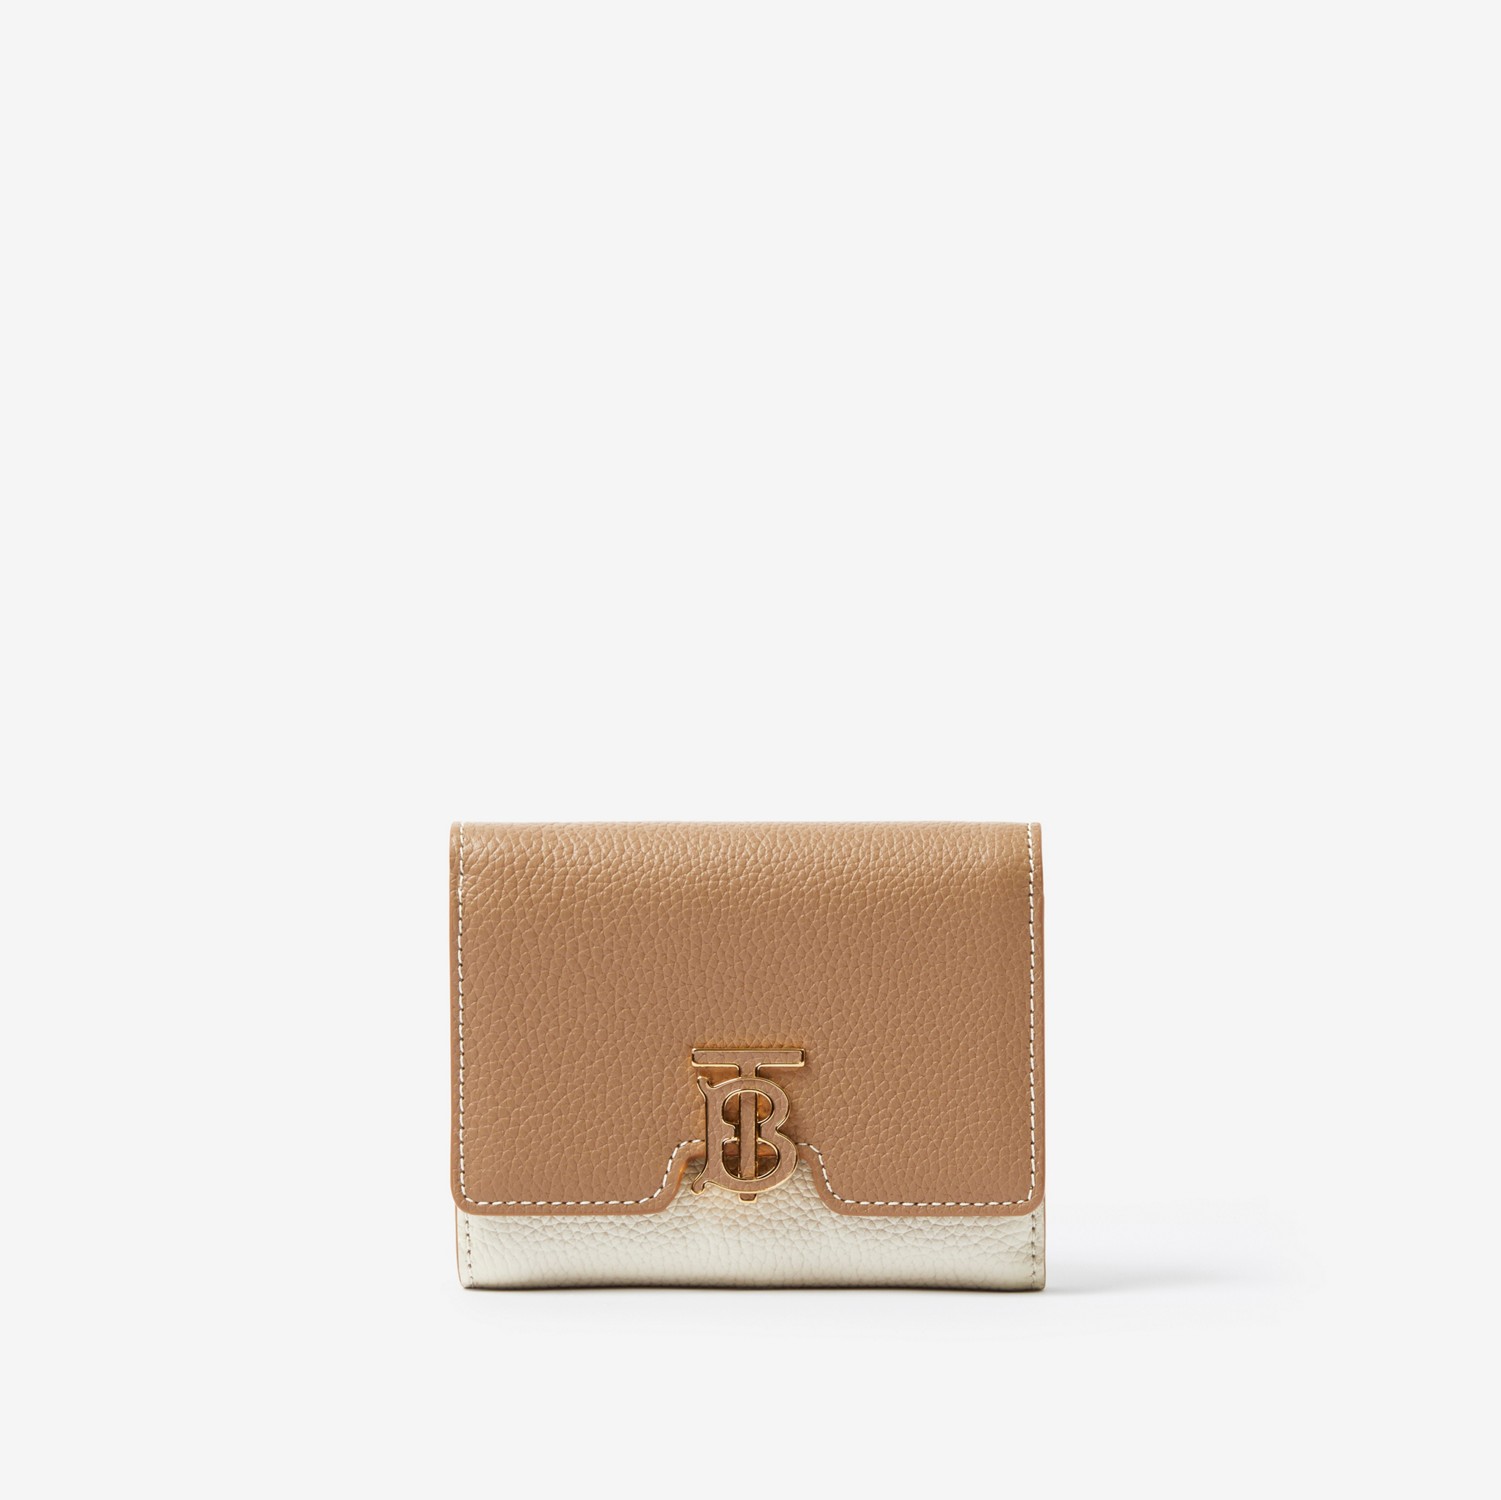 Grainy Leather TB Compact Wallet